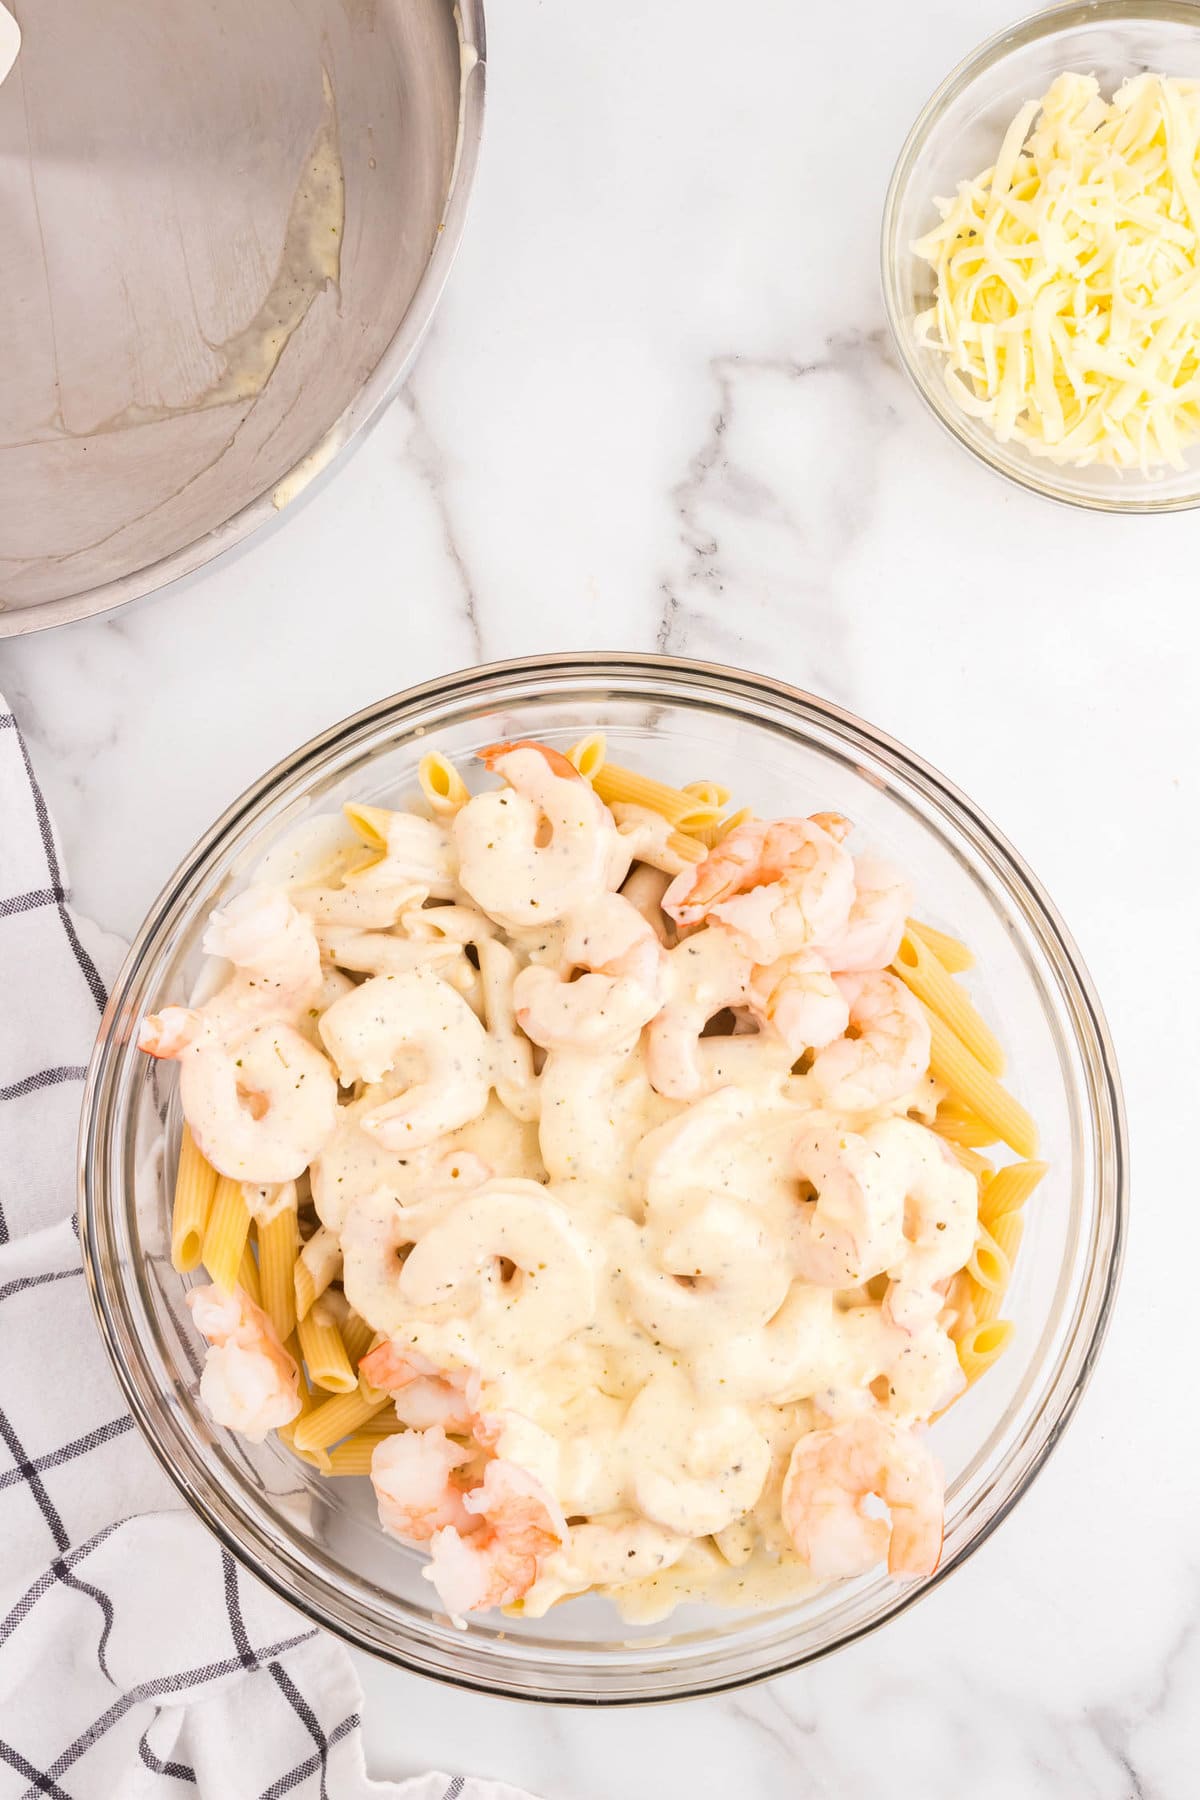 Tossing alfredo sauce, shrimp and penne noodles in mixing bowl for Shrimp Alfredo Casserole